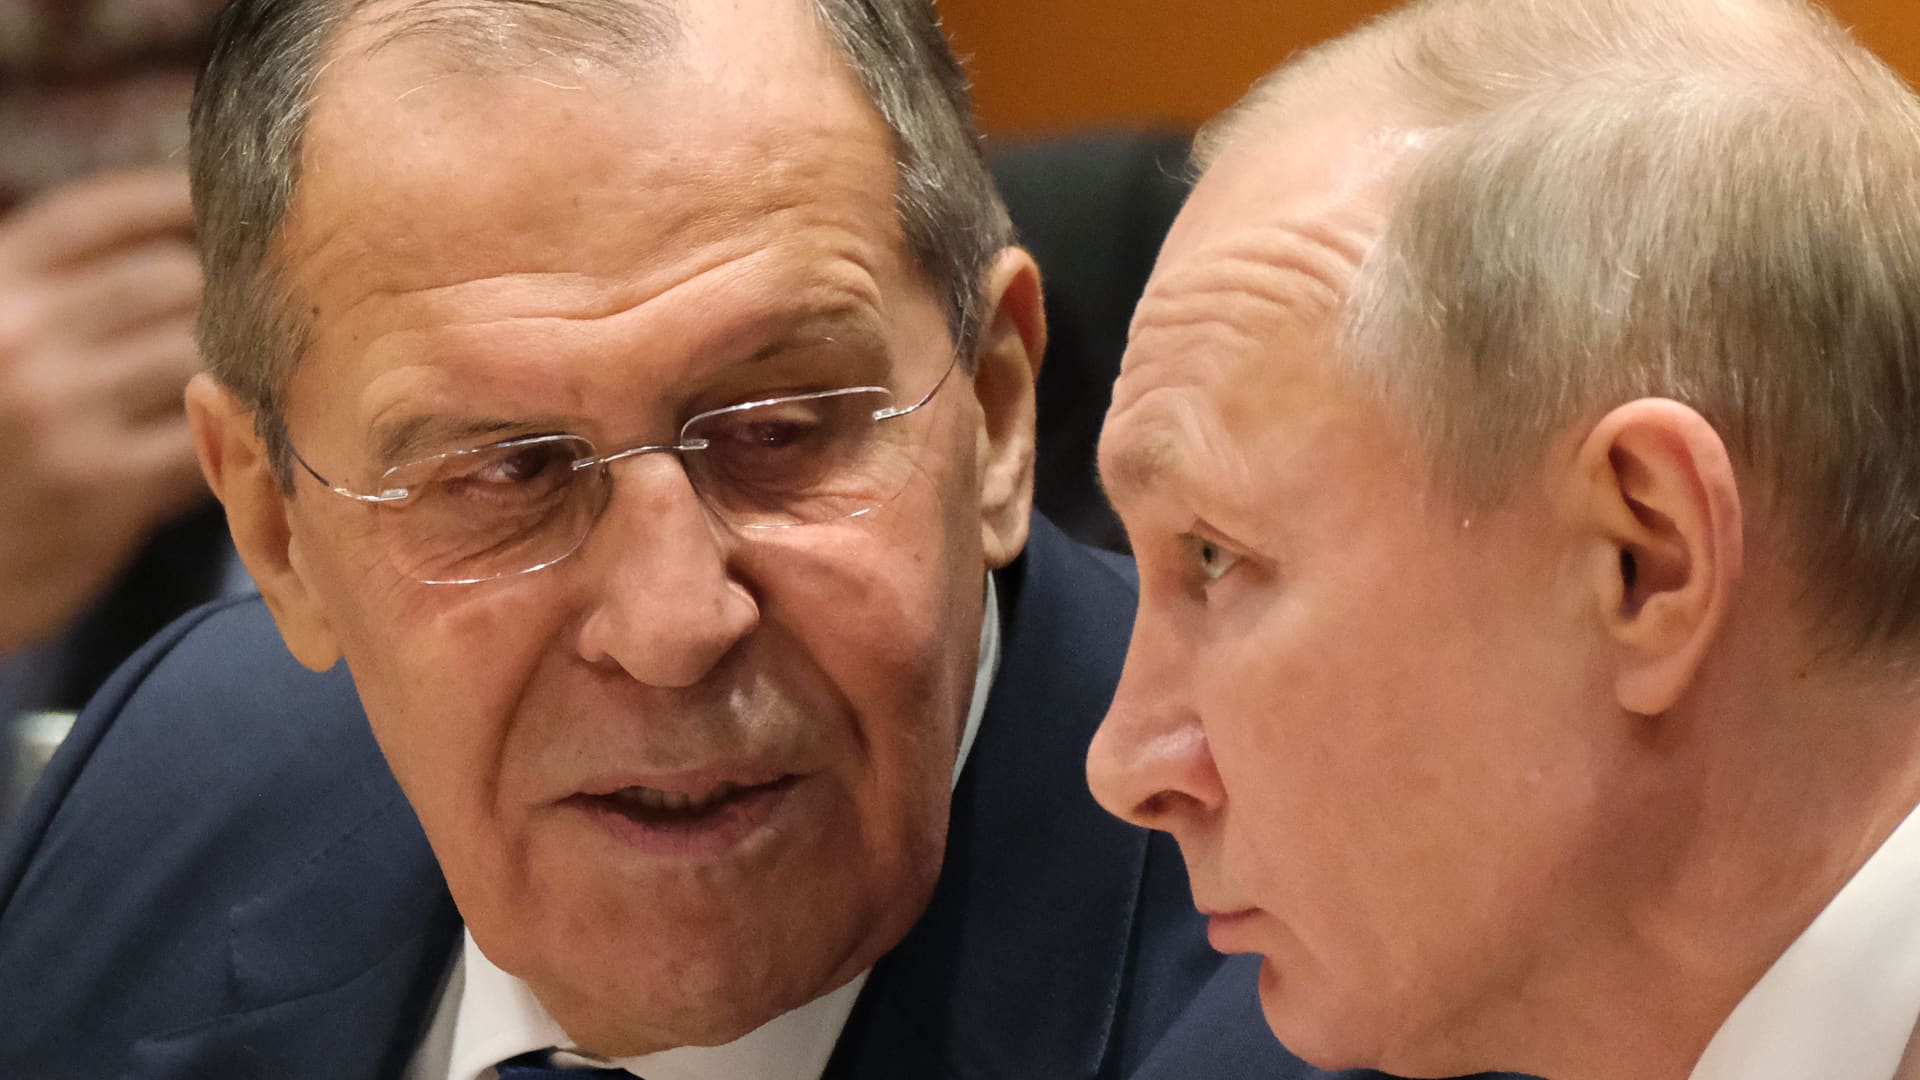 Russian President Vladimir Putin and Moscow's top diplomat Sergei Lavrov both blamed the West for creating global insecurity and instability.